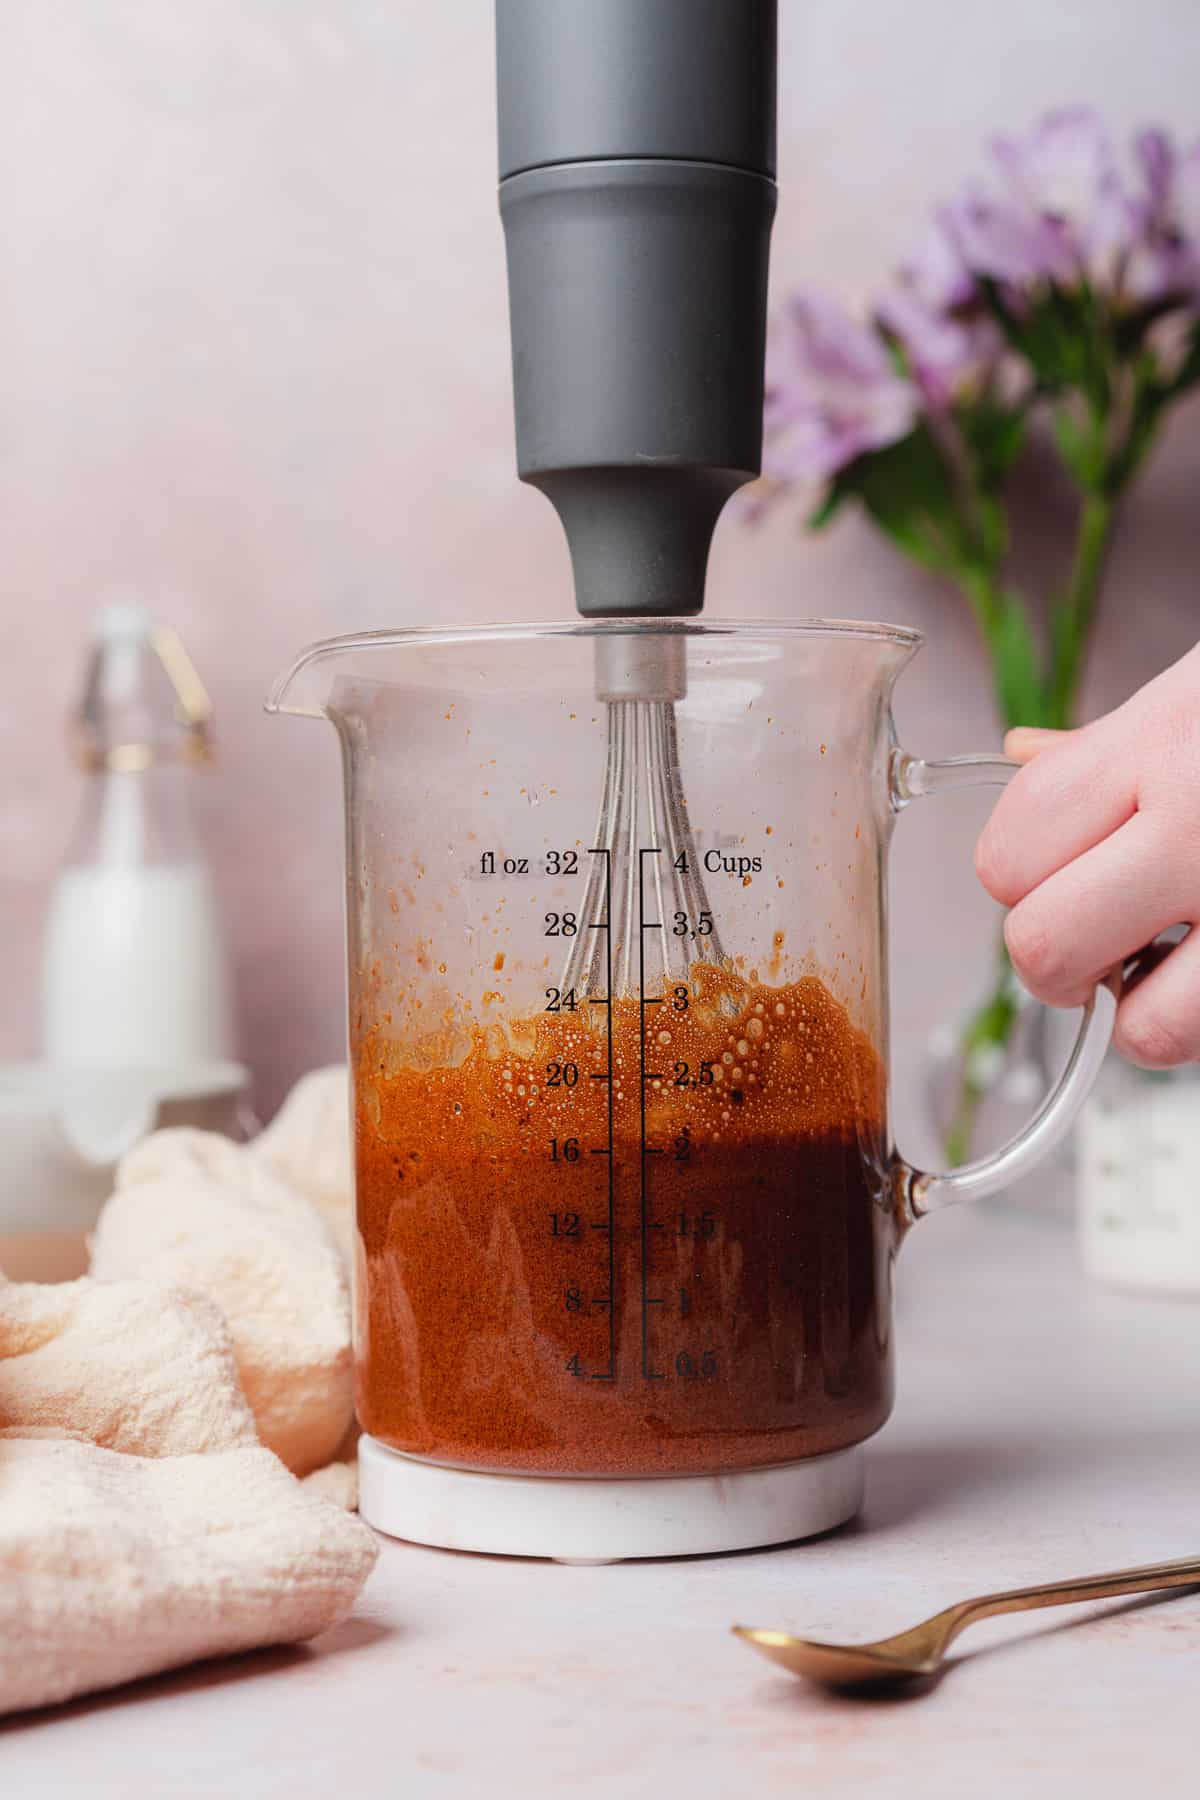 whisking together hot water and instant coffee mixture